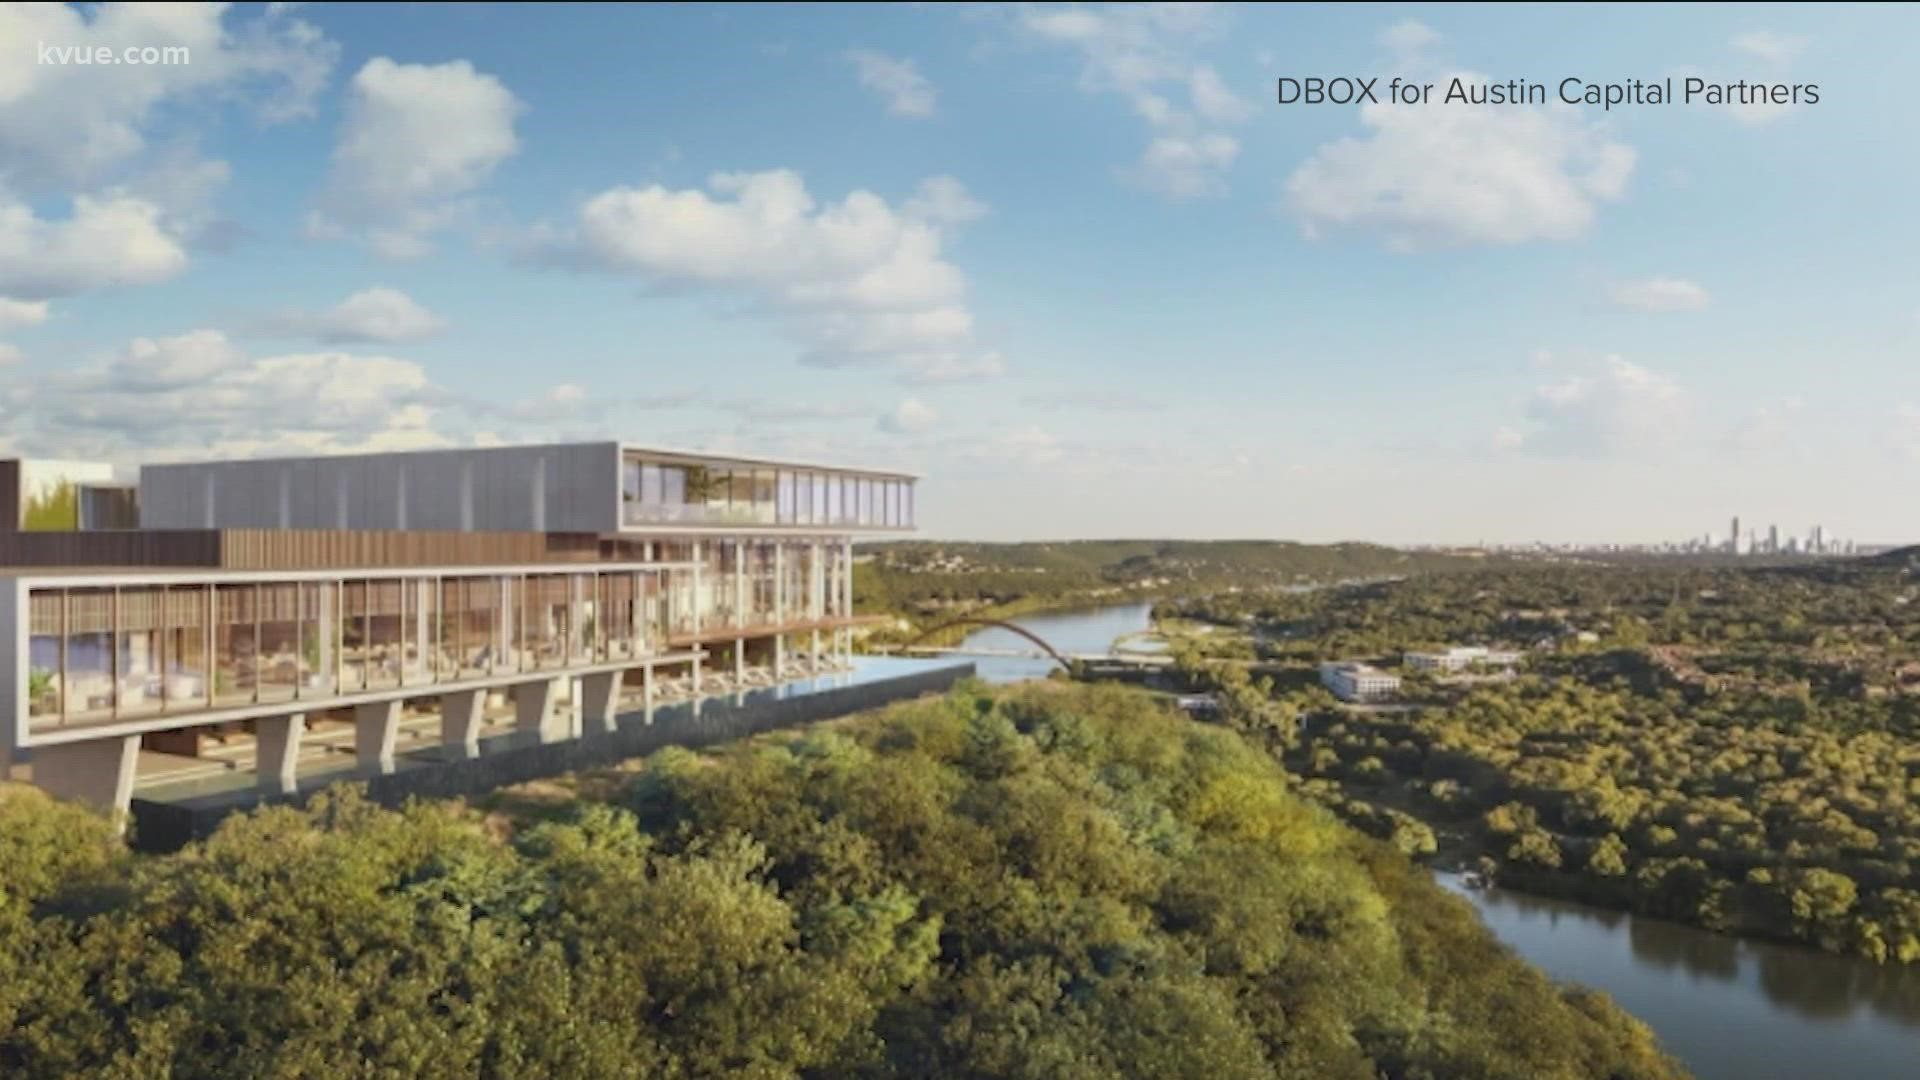 Four Seasons Hotels and Resorts is planning to open its first stand-alone residential property in Texas soon – right on Lake Austin.